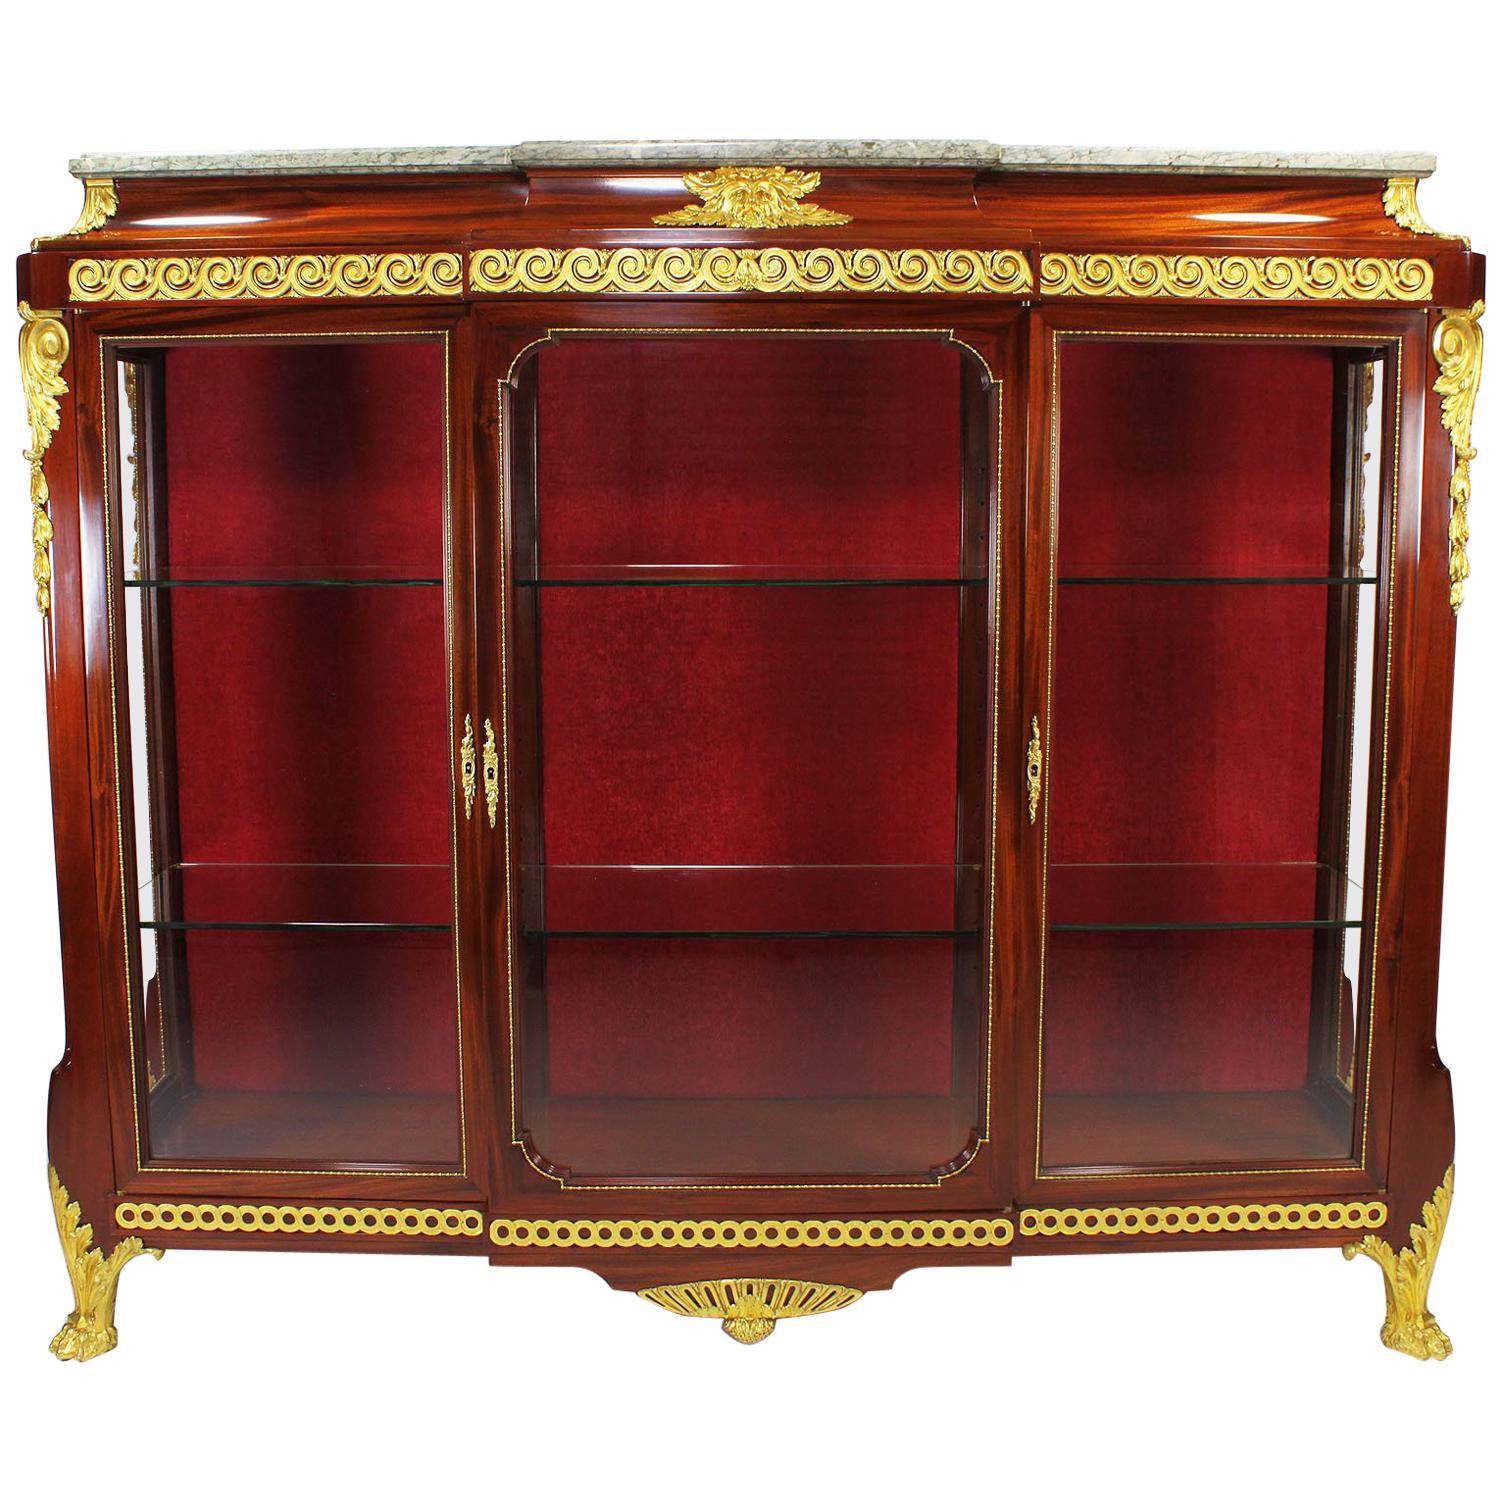 French 19th-20th Century Louis XV Style Mahogany and Ormolu Mounted Vitrine For Sale